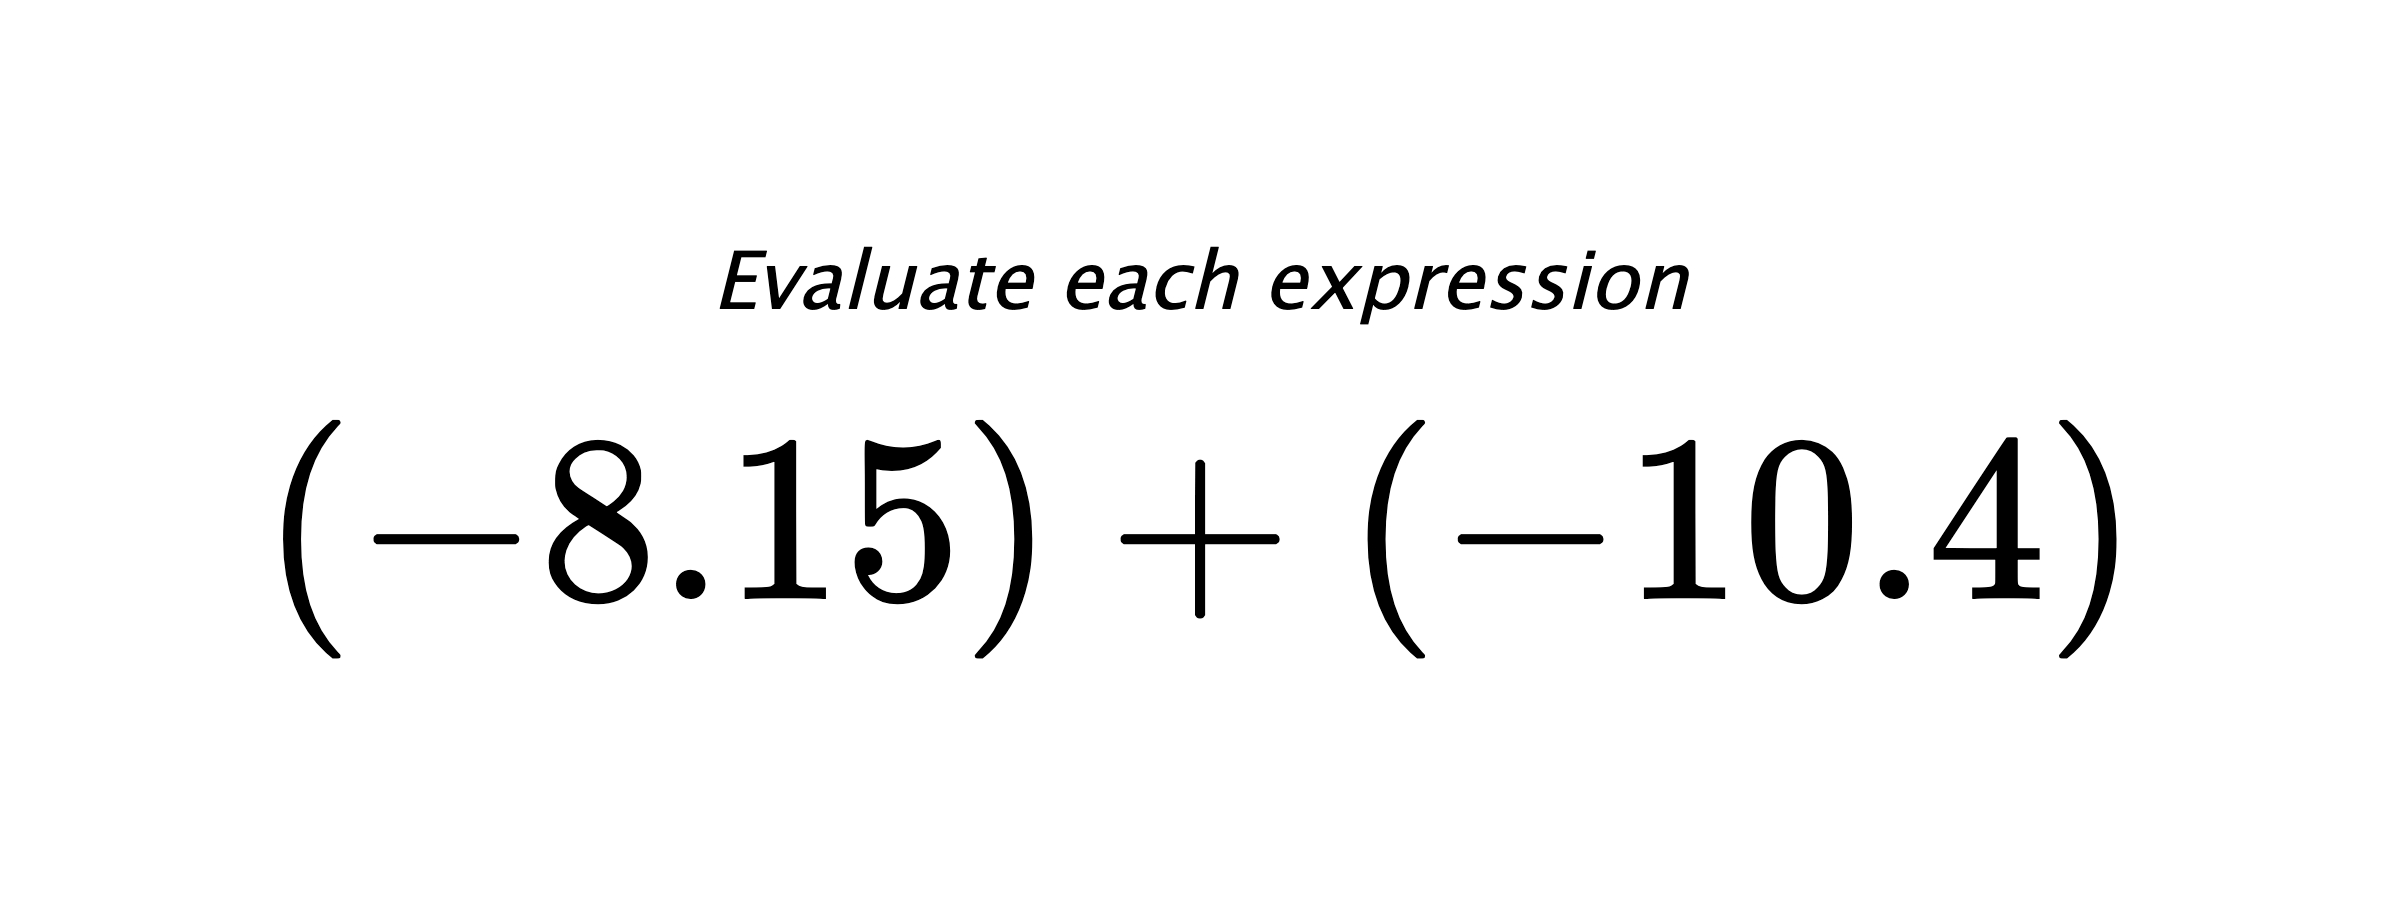 Evaluate each expression $ (-8.15)+(-10.4) $